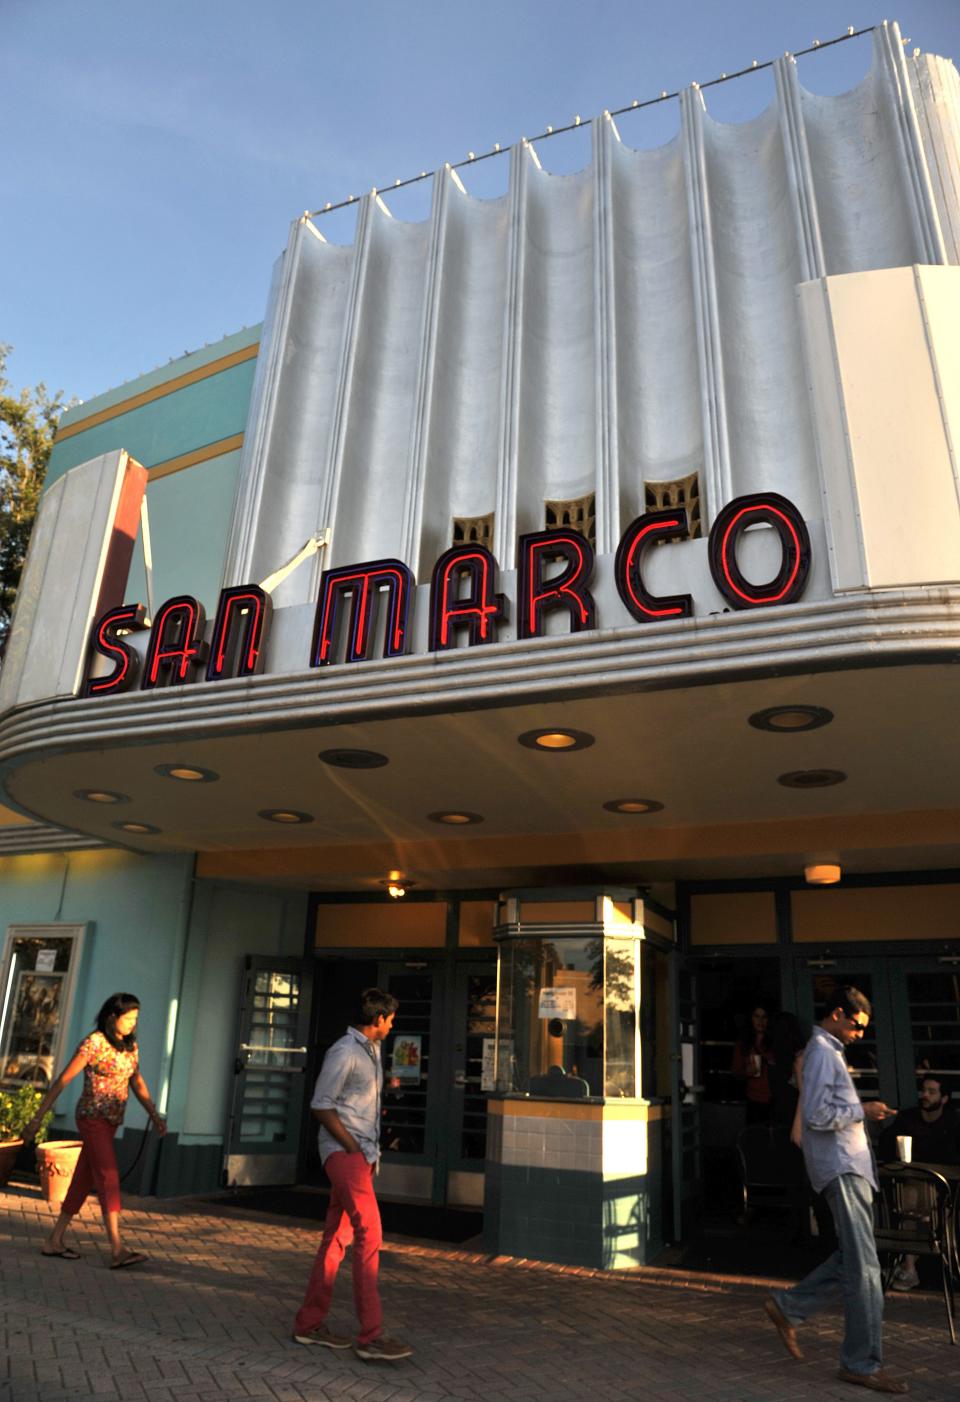 The old single-screen San Marco Theatre is still in business during the multiplex era.